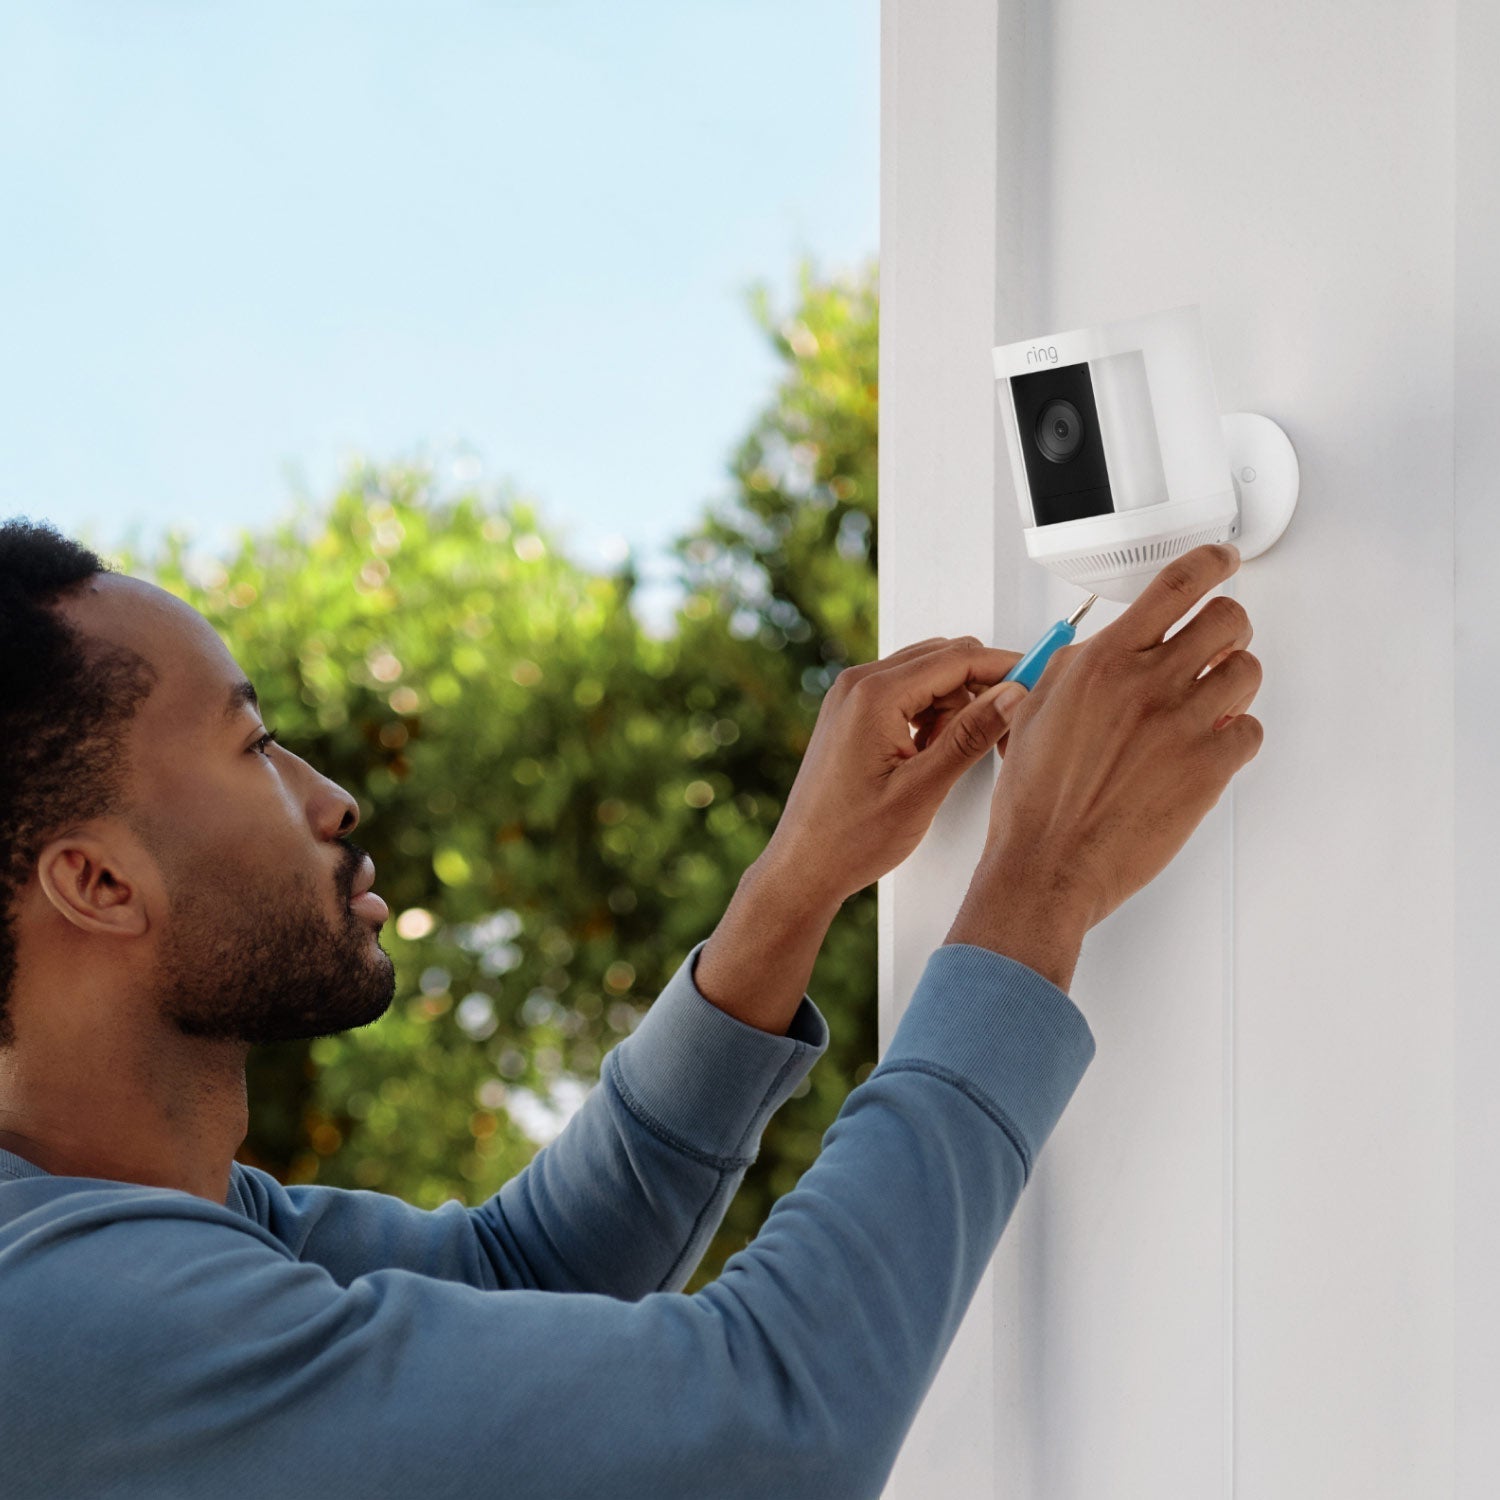 2-Pack Spotlight Cam Plus (Plug-In) - Man installing Spotlight Cam Plus, Plug-In model in white on exterior wall of home.